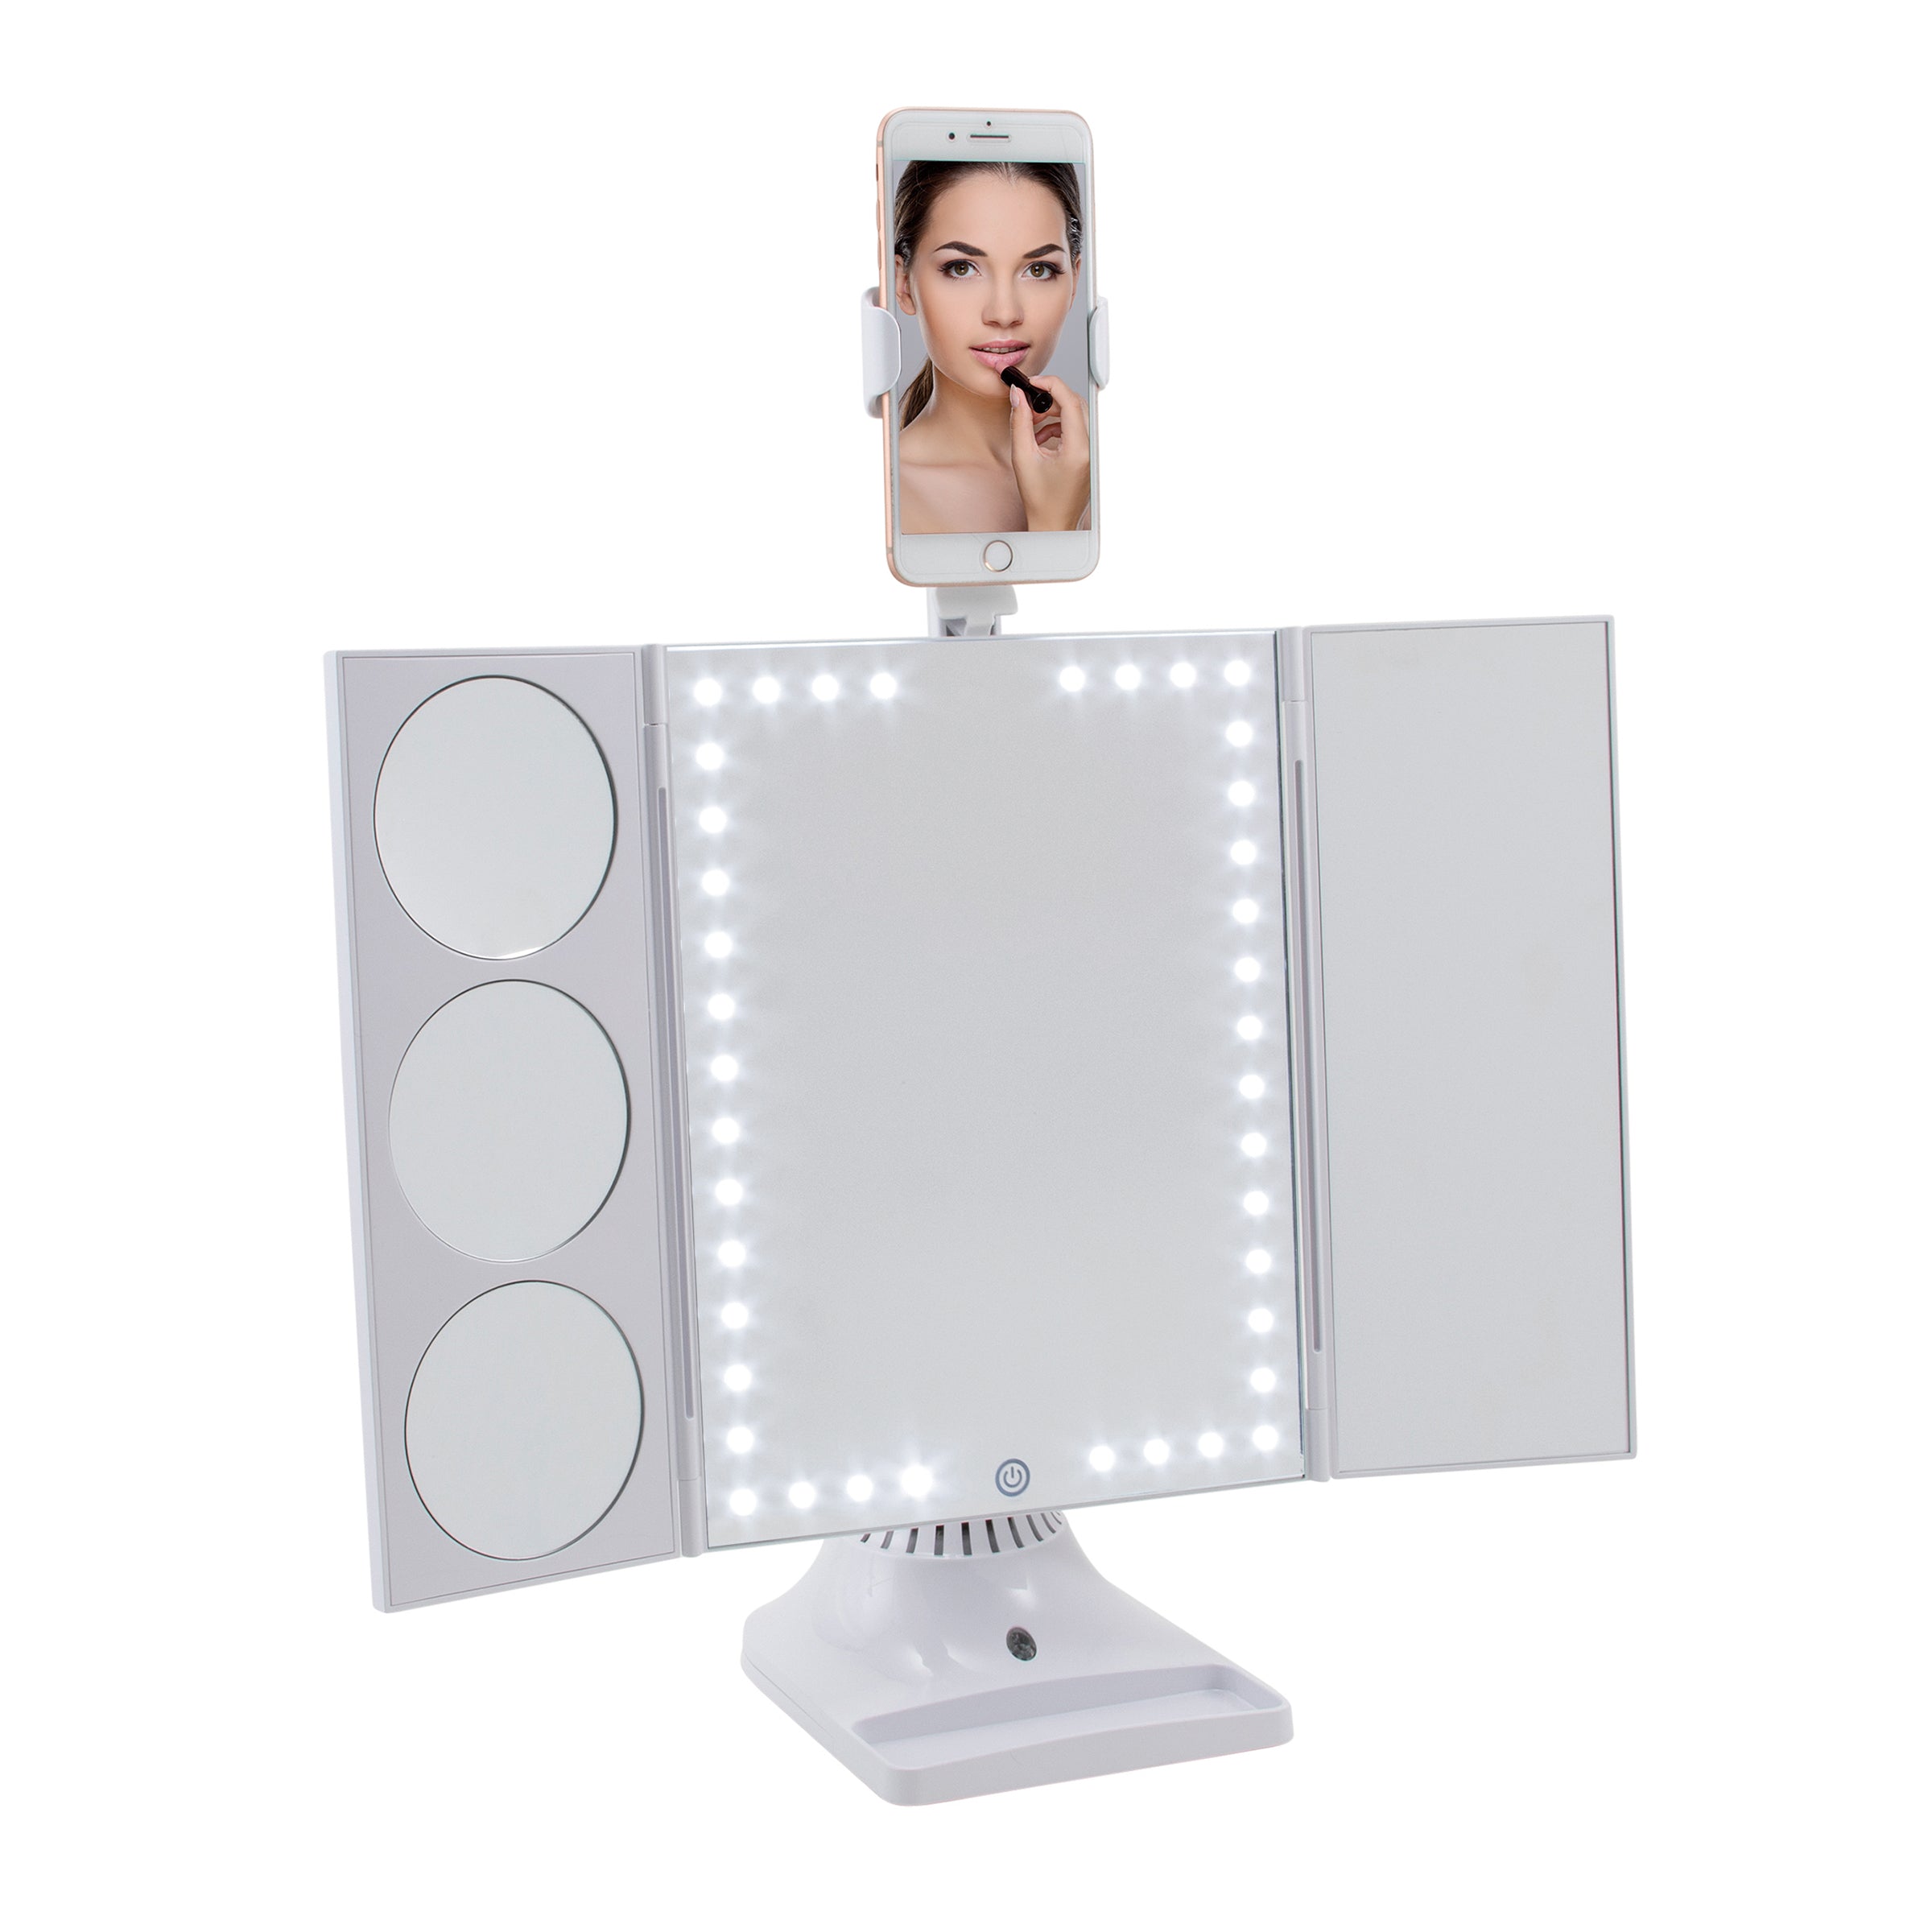 Bluetooth LED Makeup Mirror with Phone Attachment - White